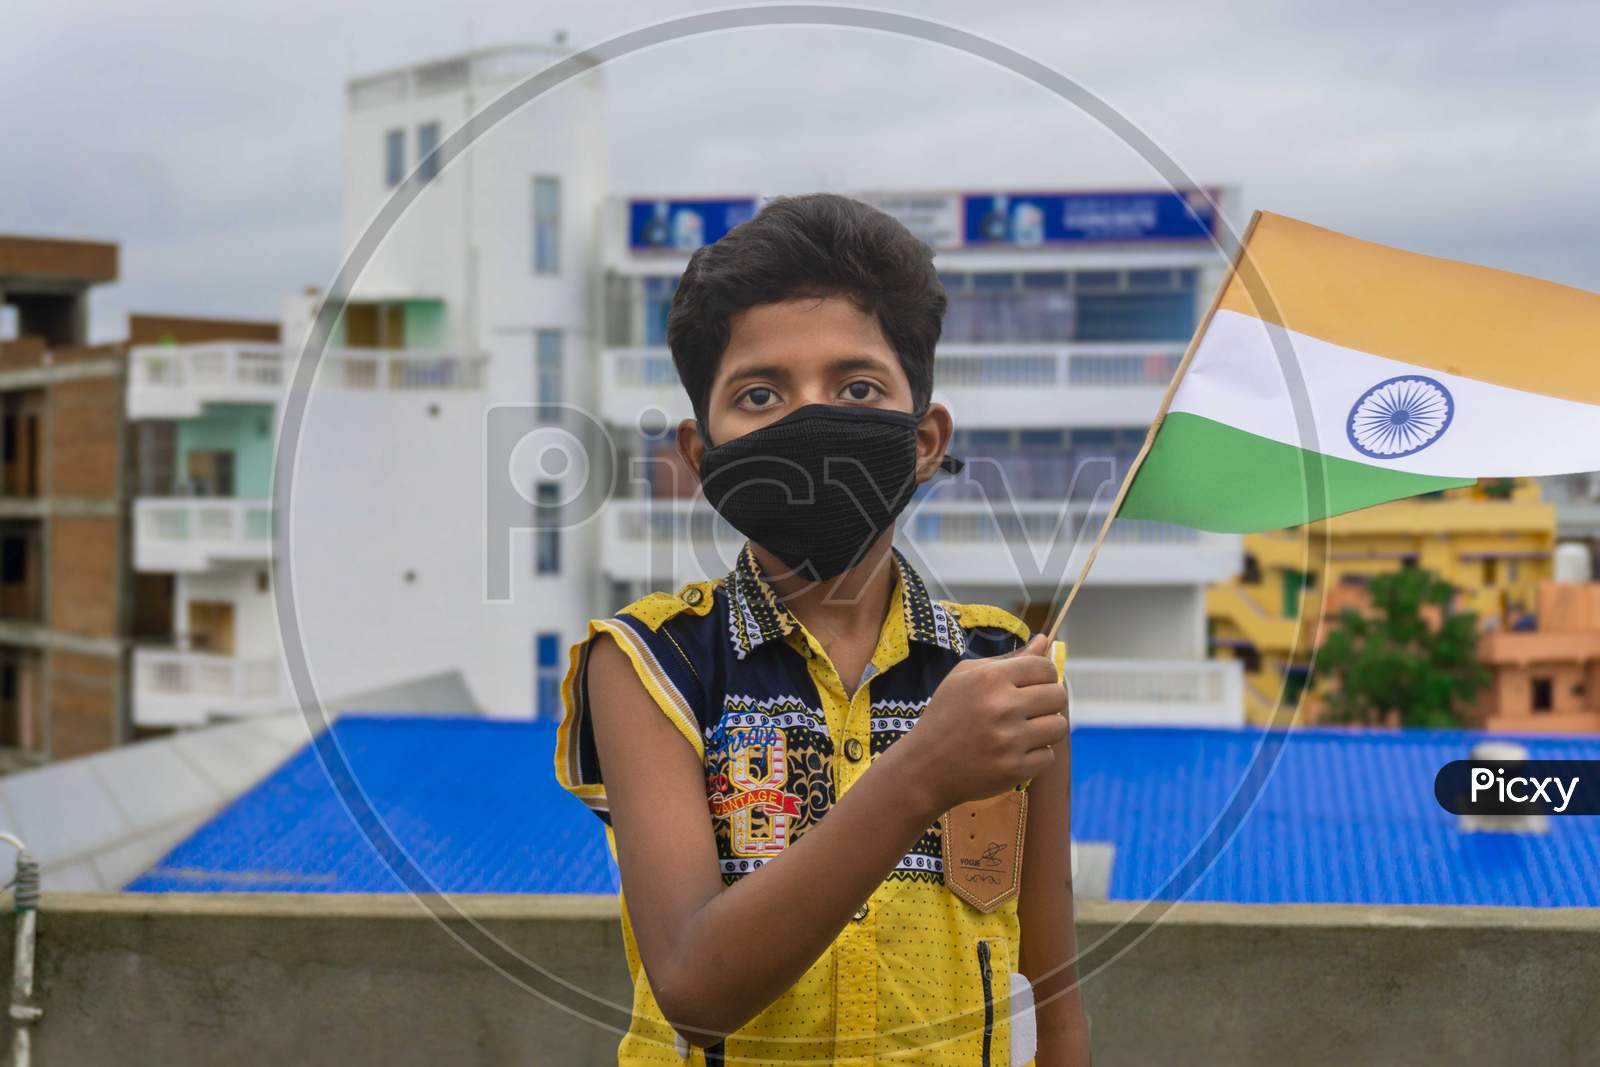 KID WEARING MASK AND HOLDING INDIAN FLAG